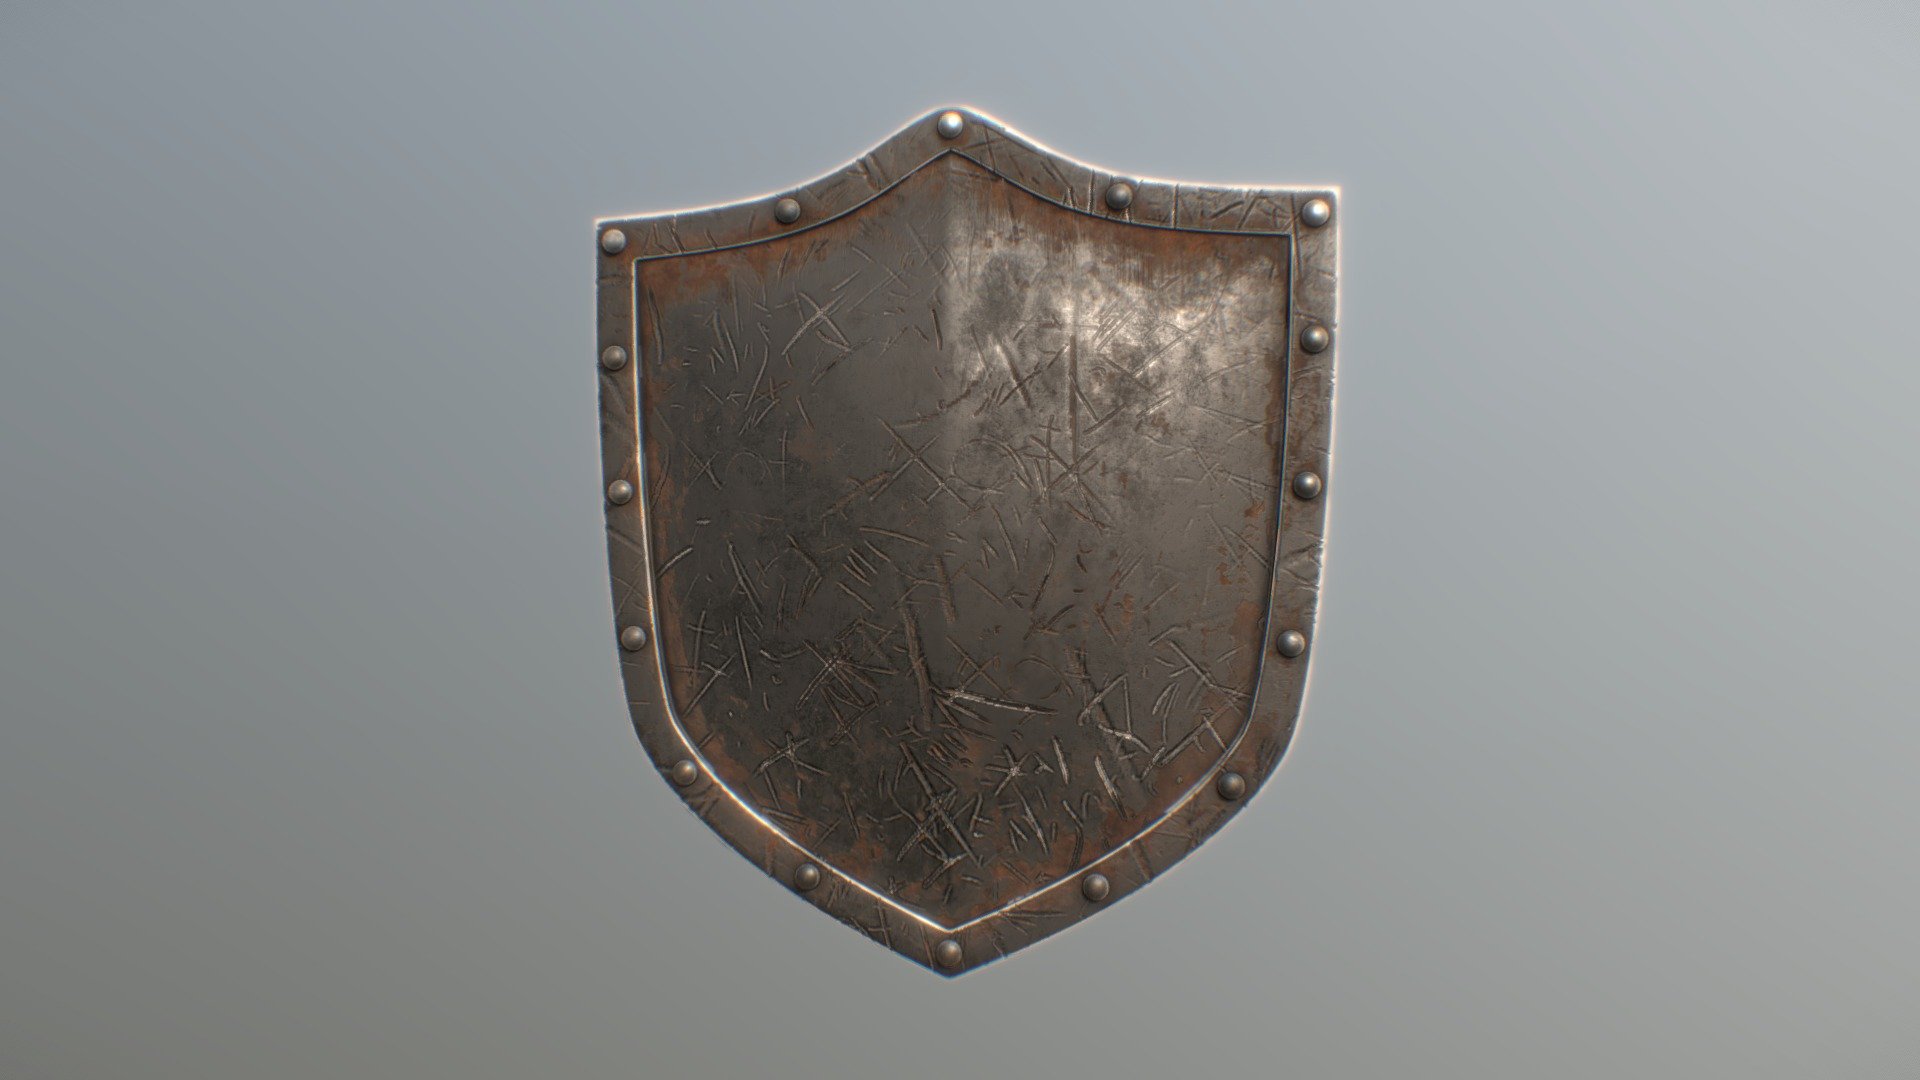 An awesome Iron Shield for your games - Iron Shield - Buy Royalty Free 3D m...